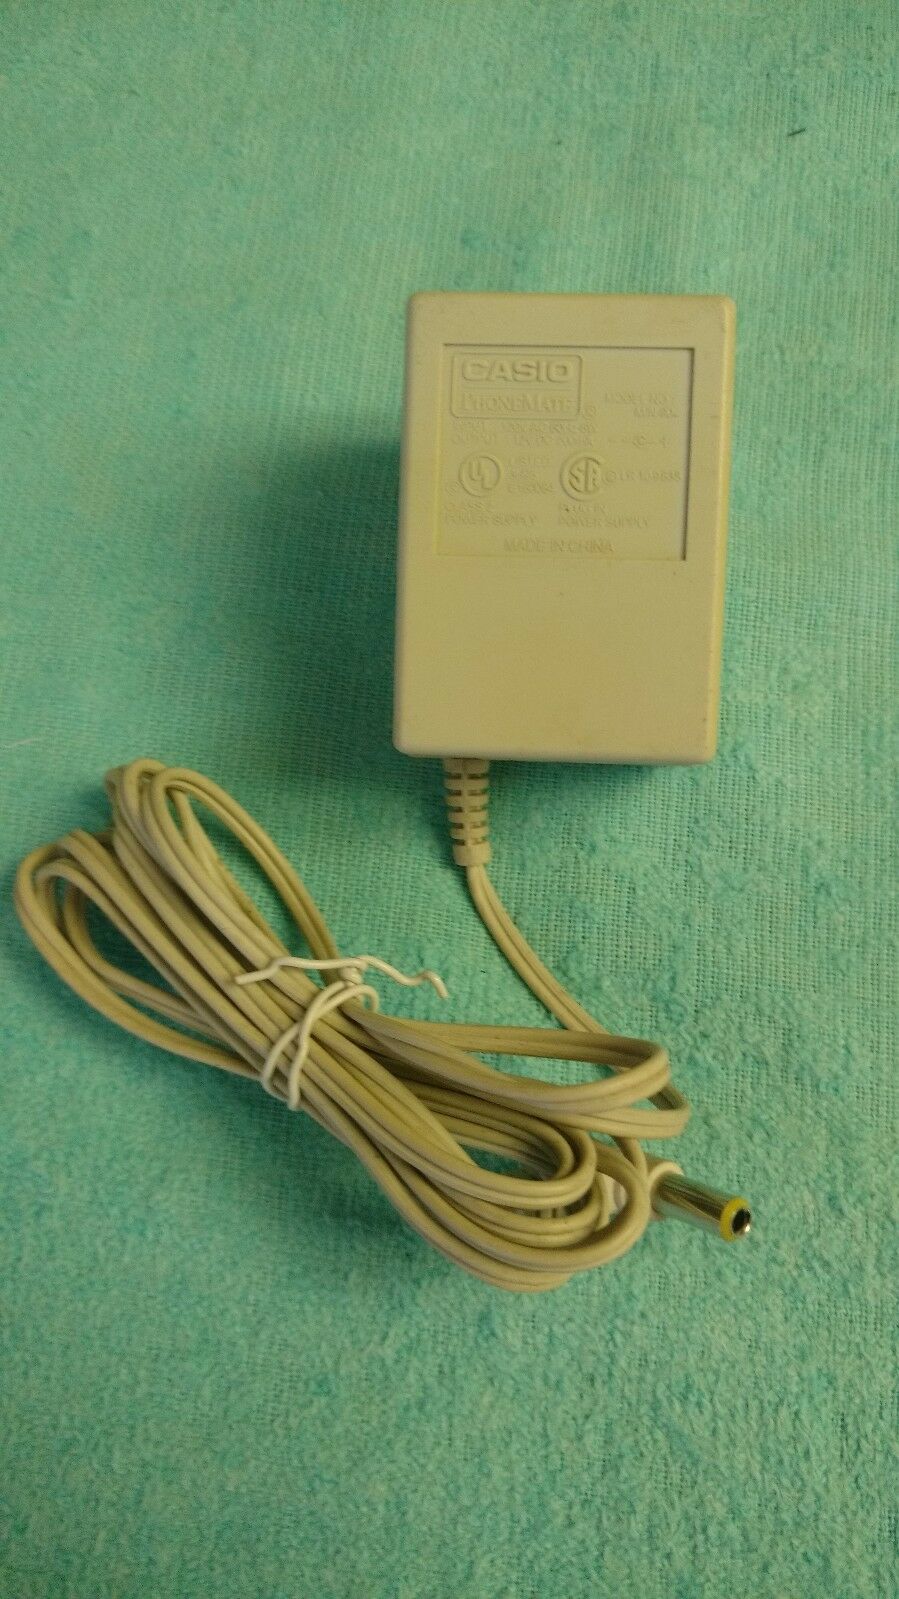 Casio PhoneMate AC Power Supply Adapter M/N-90 12V DC 200mA 5.5 x 2.1 White Model: M/N-90 Output Voltage: 12V Type: - Click Image to Close